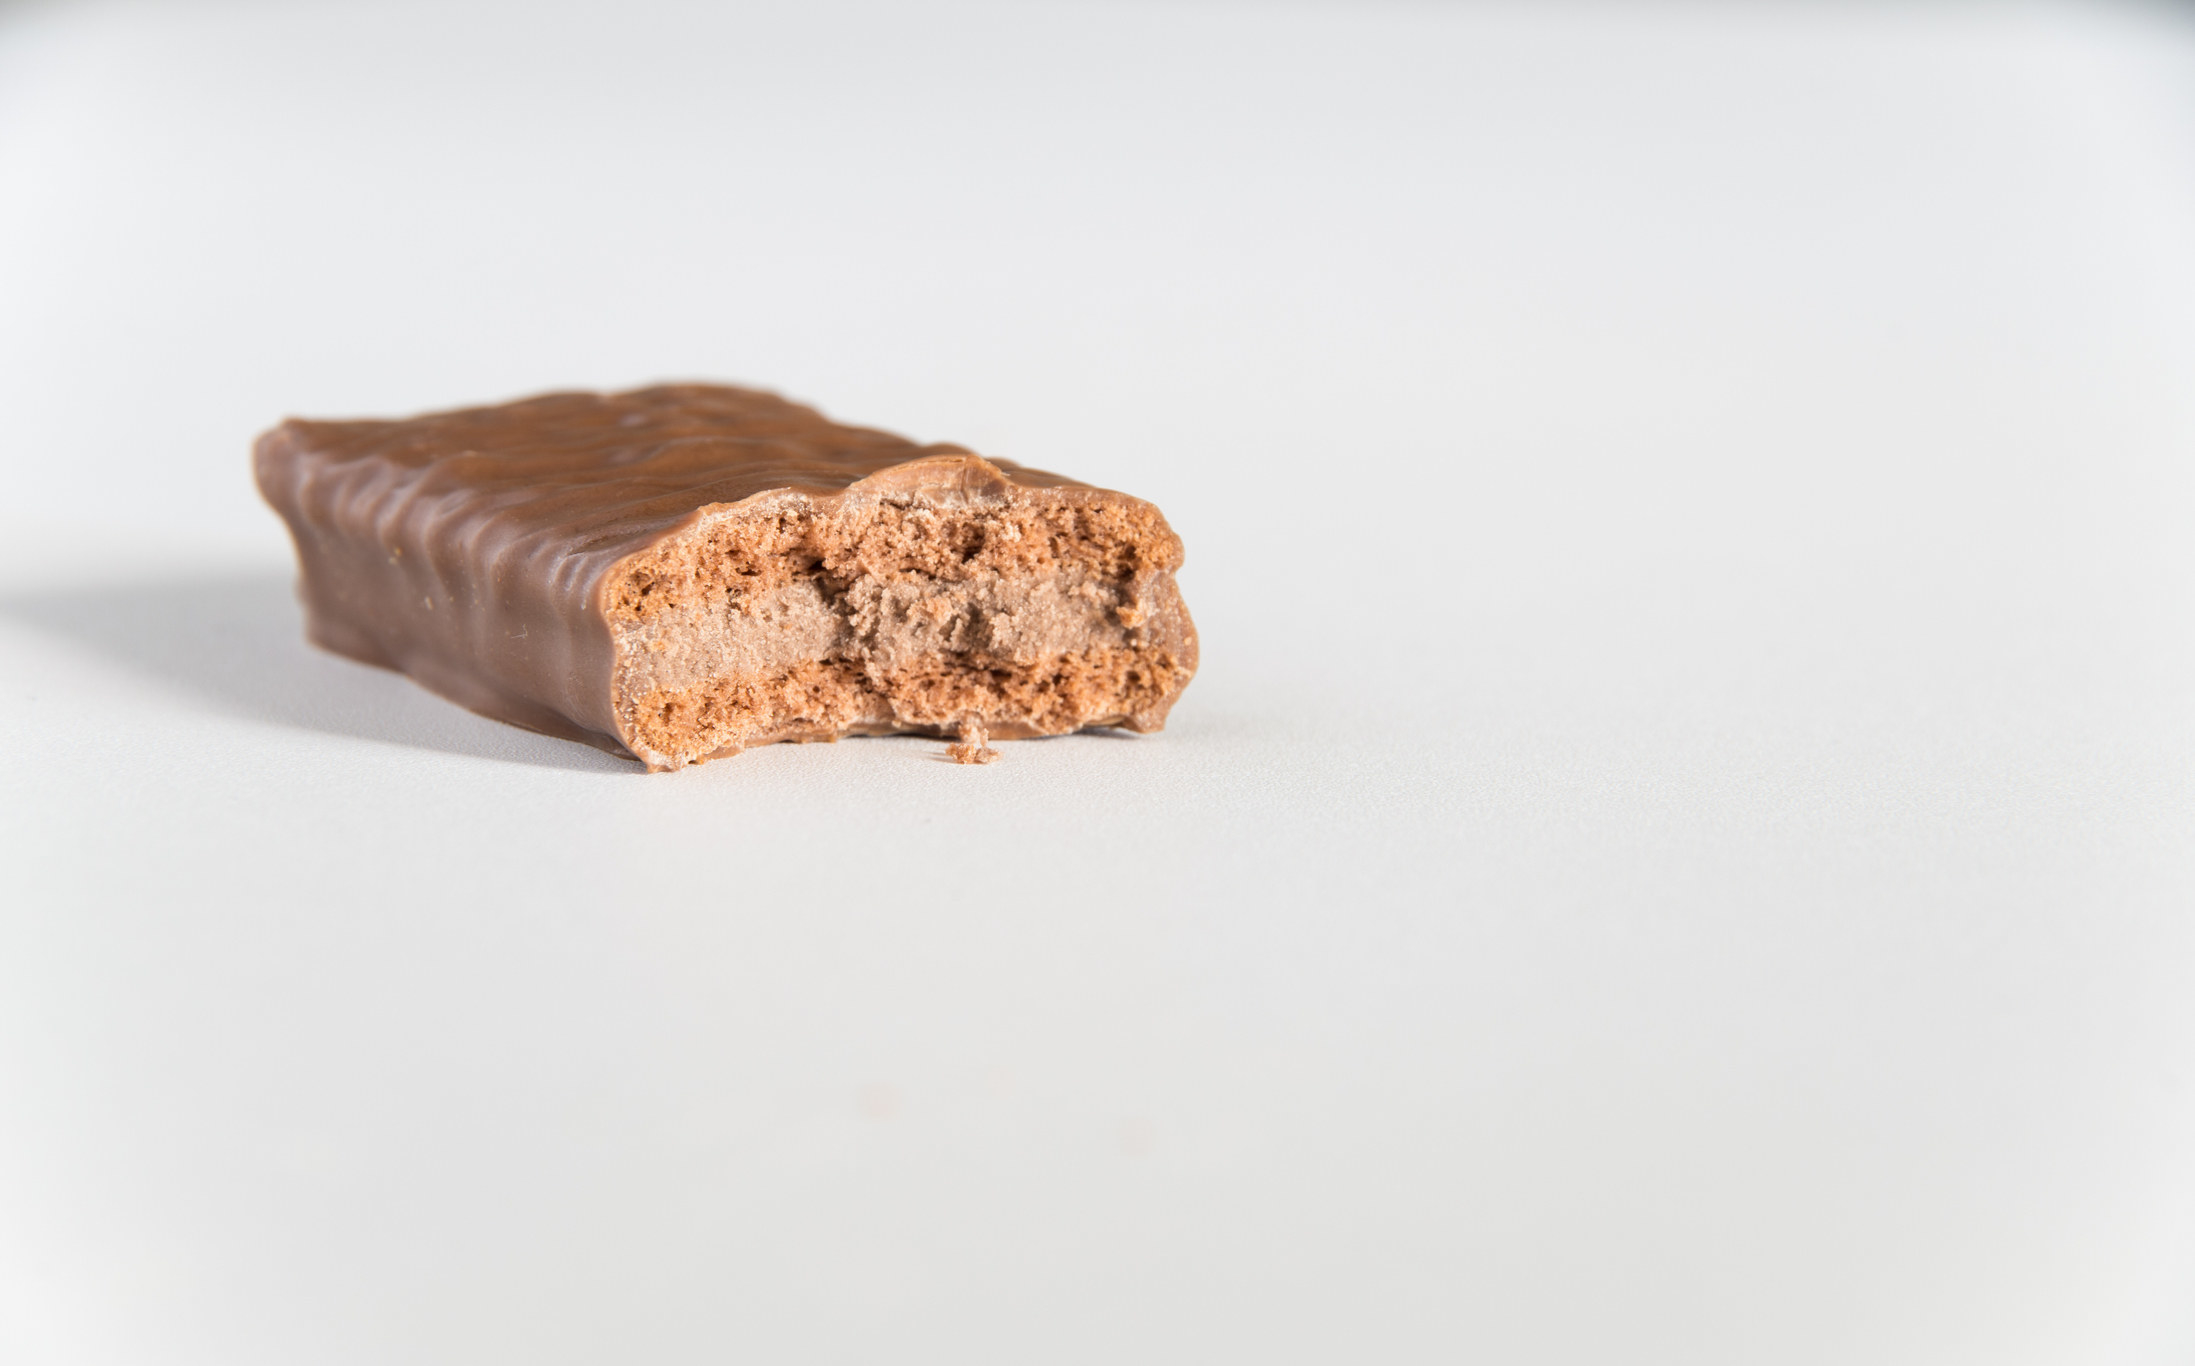 A Tim Tam with a bite taken out of it.